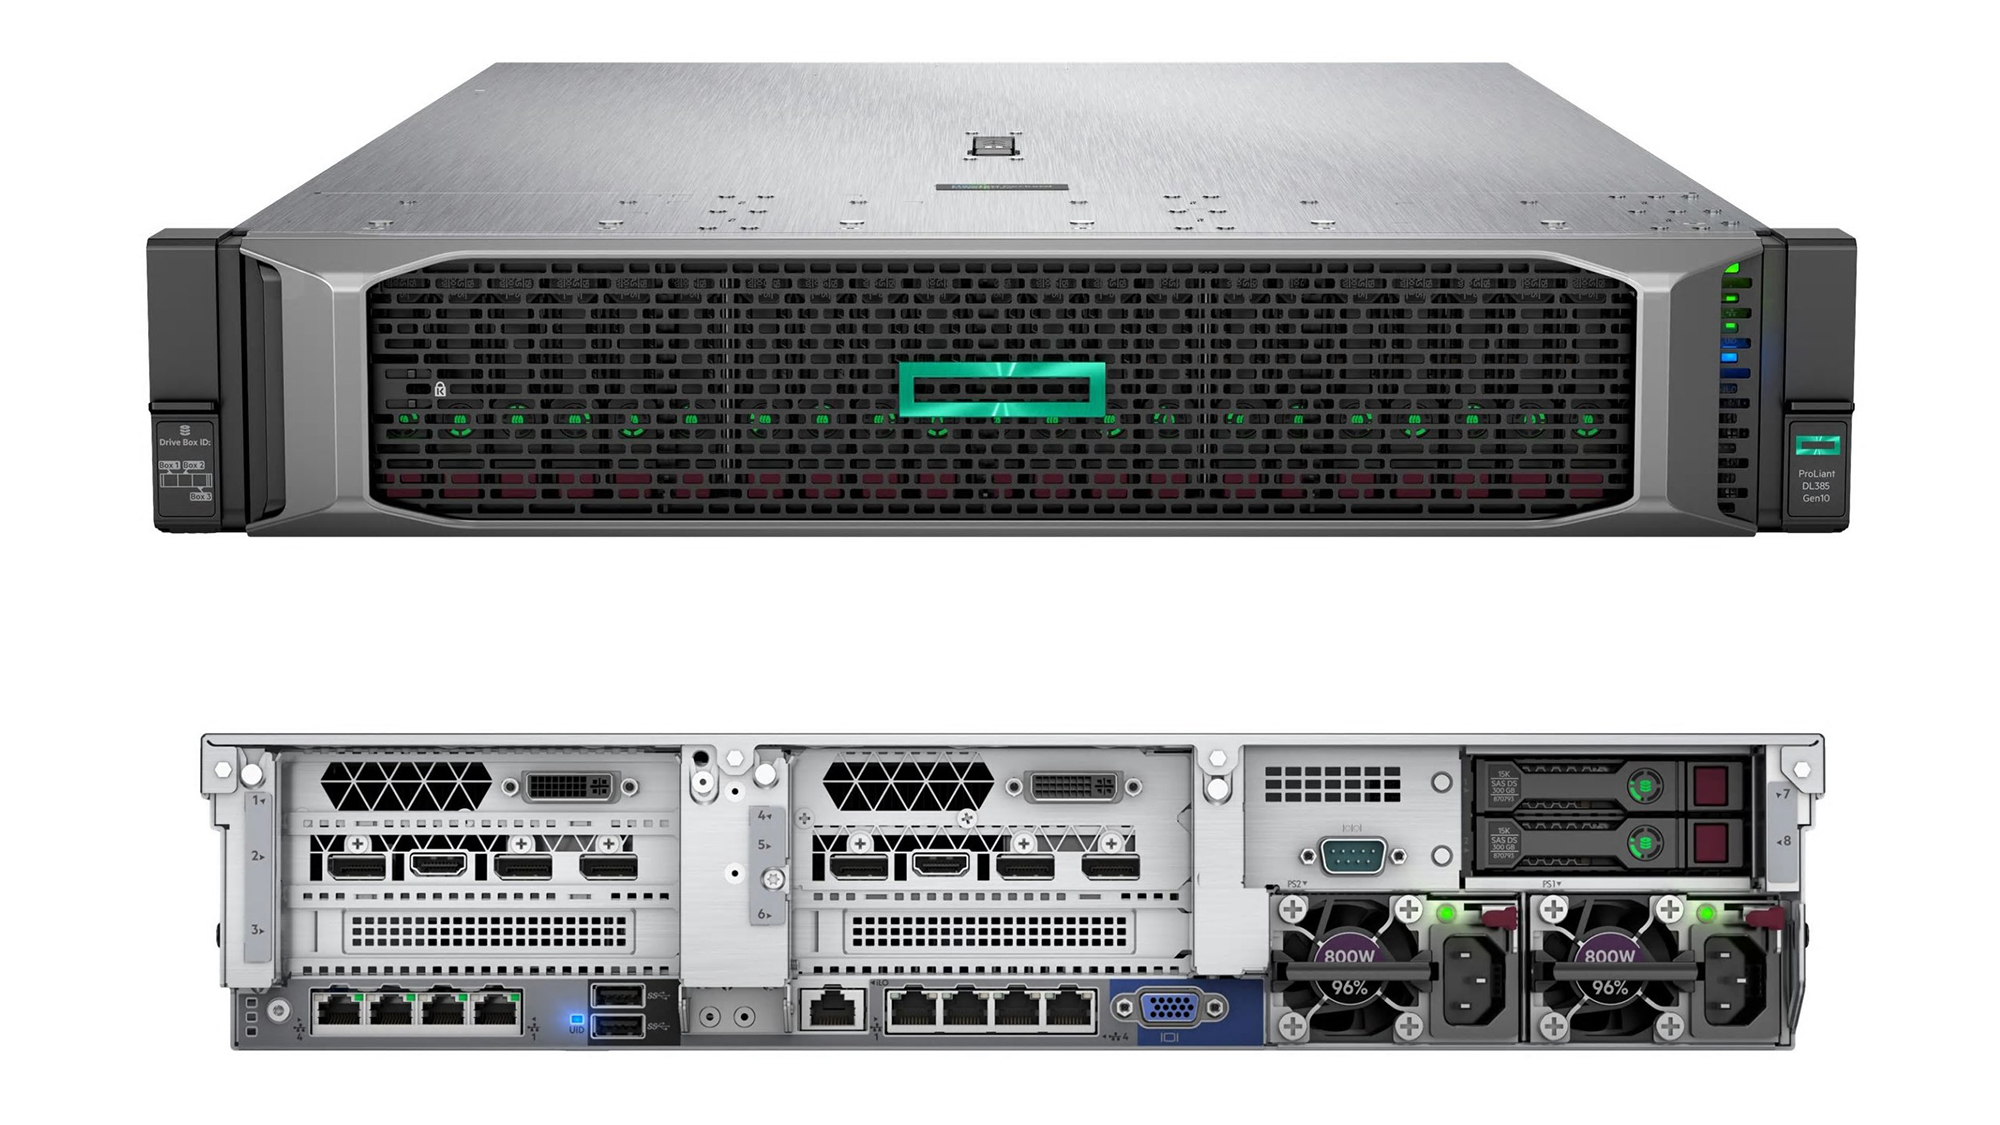 hpe_proliant_dl385_gen10_front_and_rear